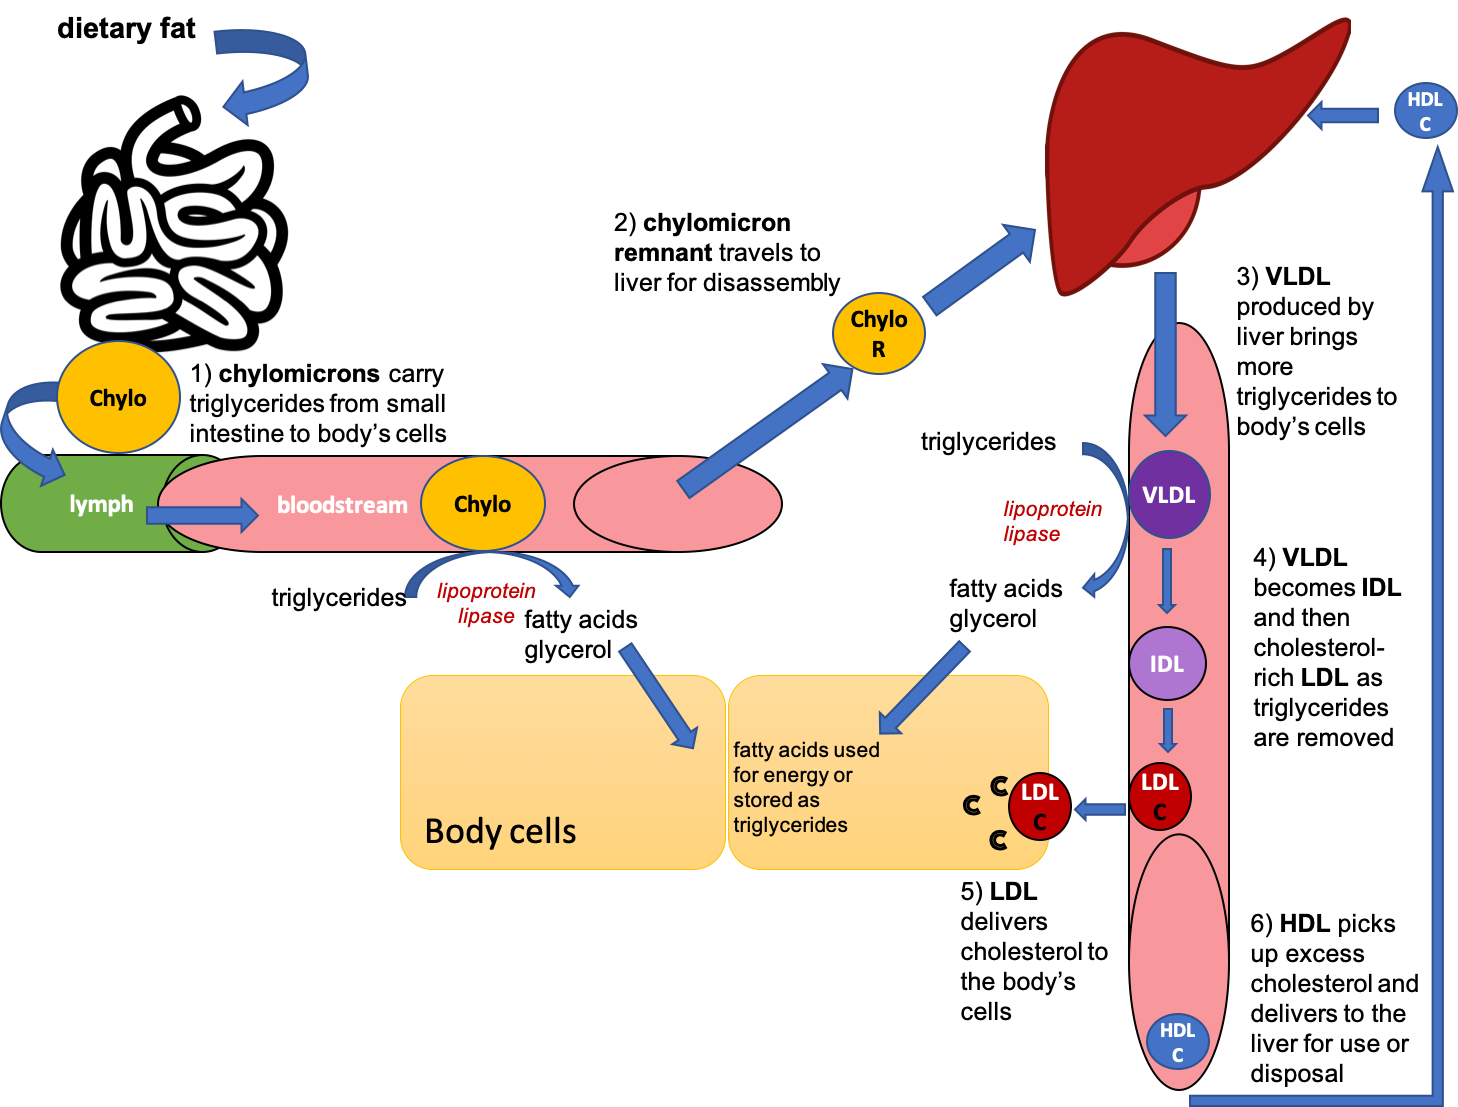 This cartoon diagram shows dietary fat entering the small intestine, being packaged in chylomicrons, and then being carried into the lymph and then bloodstream. Chylomicrons deliver triglycerides to the body's cells, and then chylomicron remnants travel to the liver. The liver produces VLDL, which also delivers triglycerides to the body's cells, and as triglycerides are removed, become IDL and LDL. HDL picks up excess cholesterol and returns it to the liver.